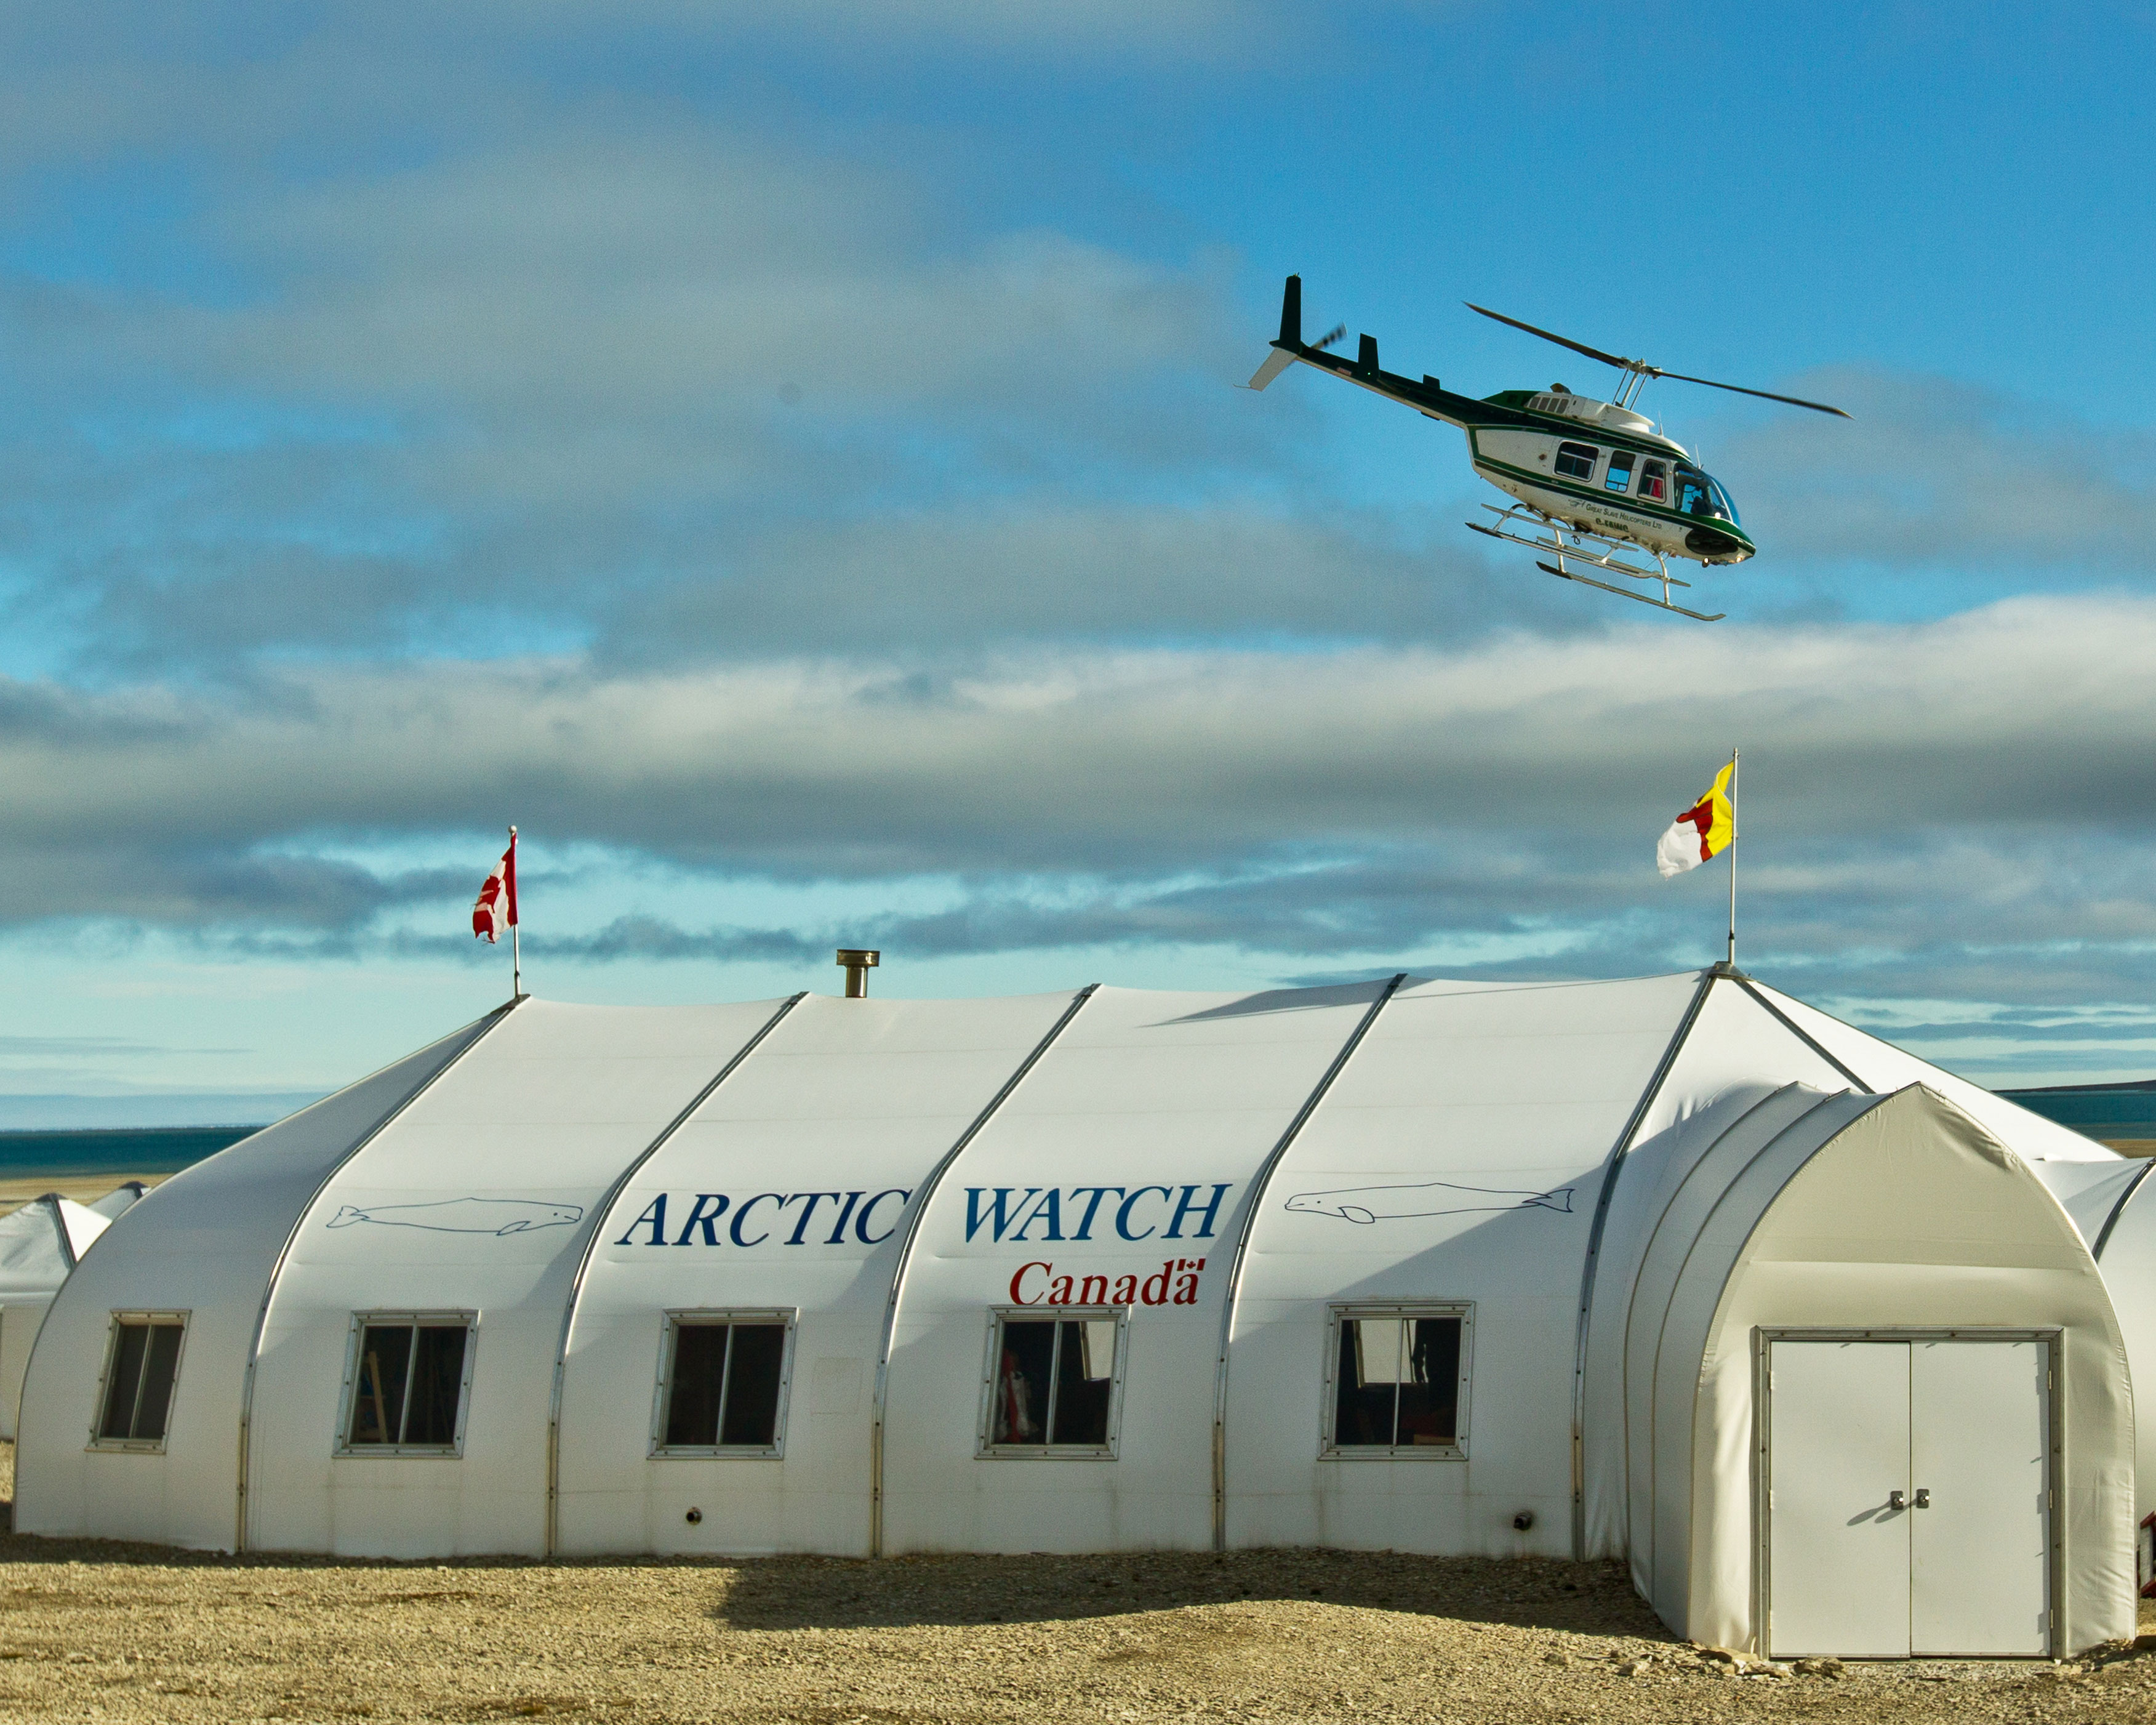 Finest lodges: white lodge in the Arctic with a helicopter flying overhead.